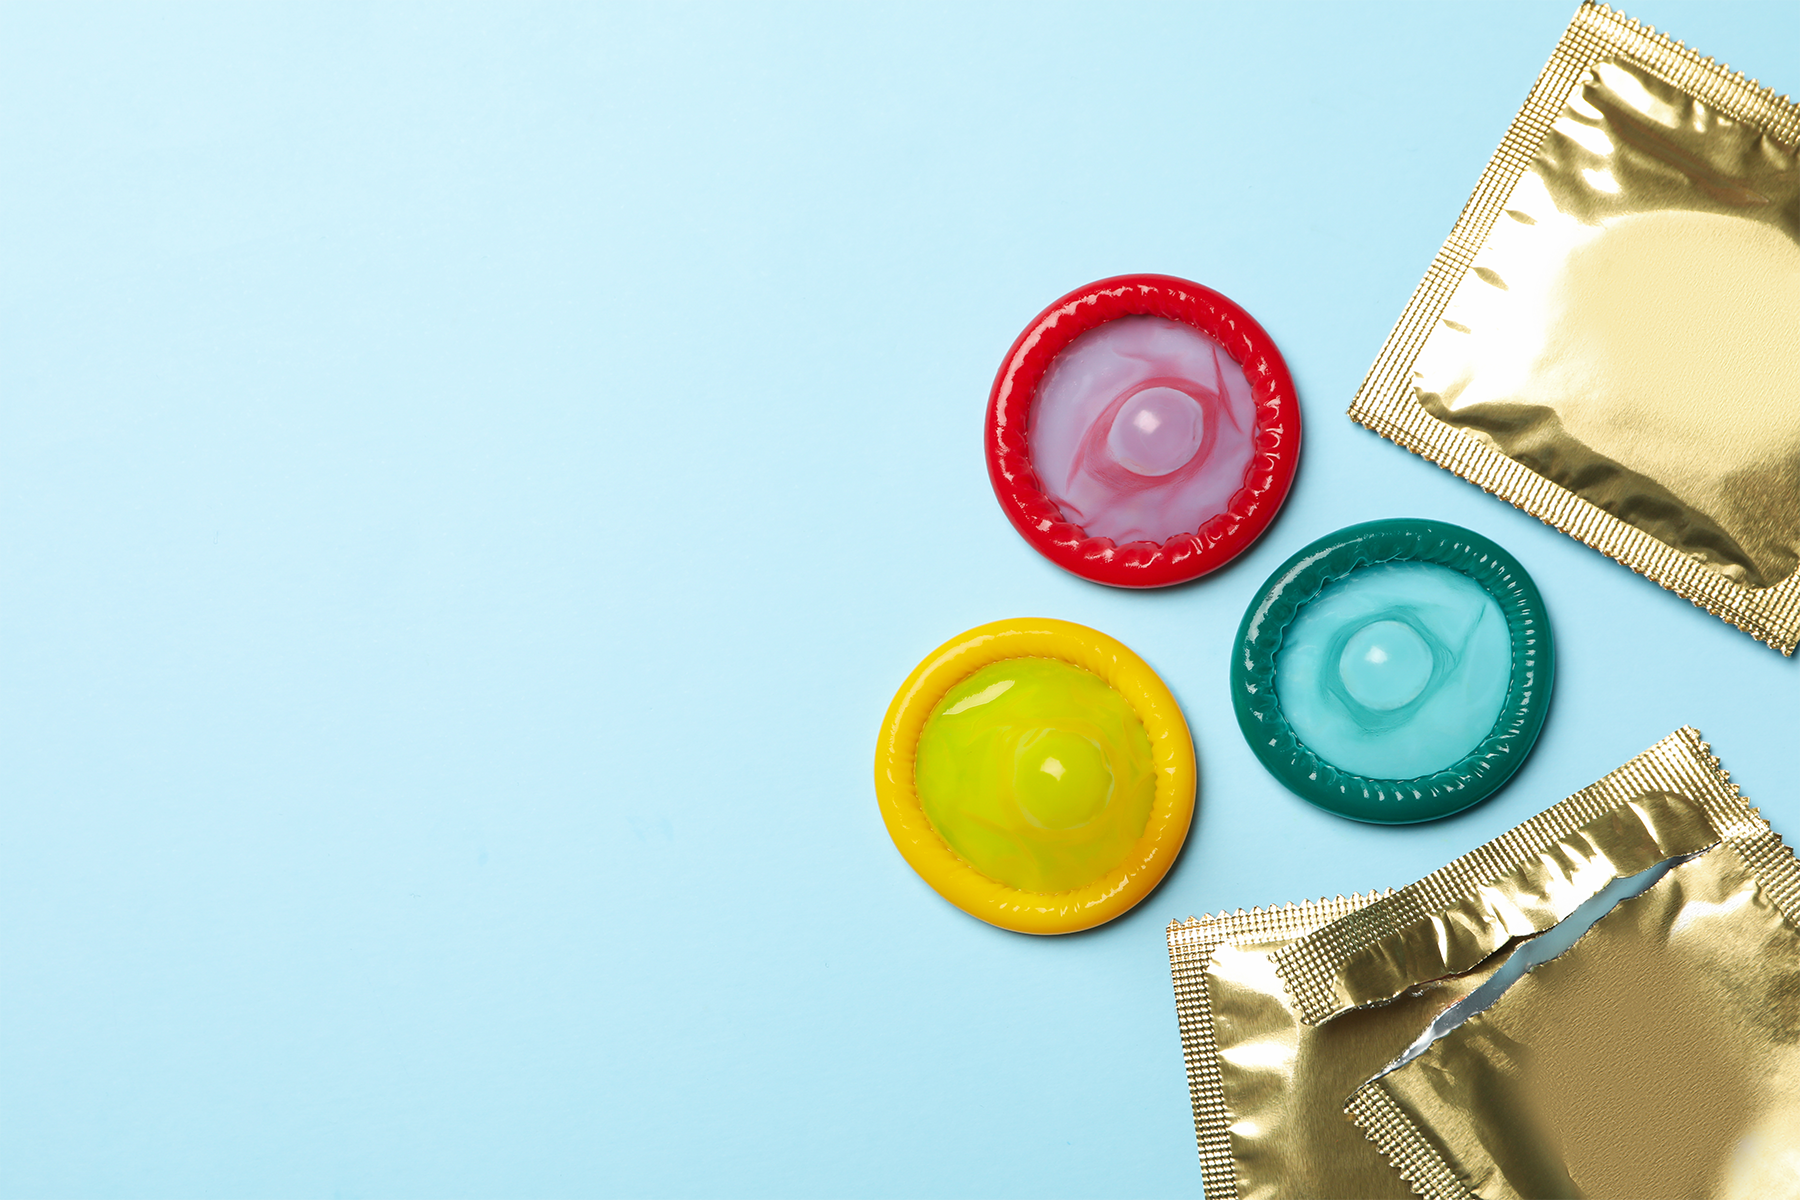 STI Spotlight: Chlamydia – what you need to know about chlamydia